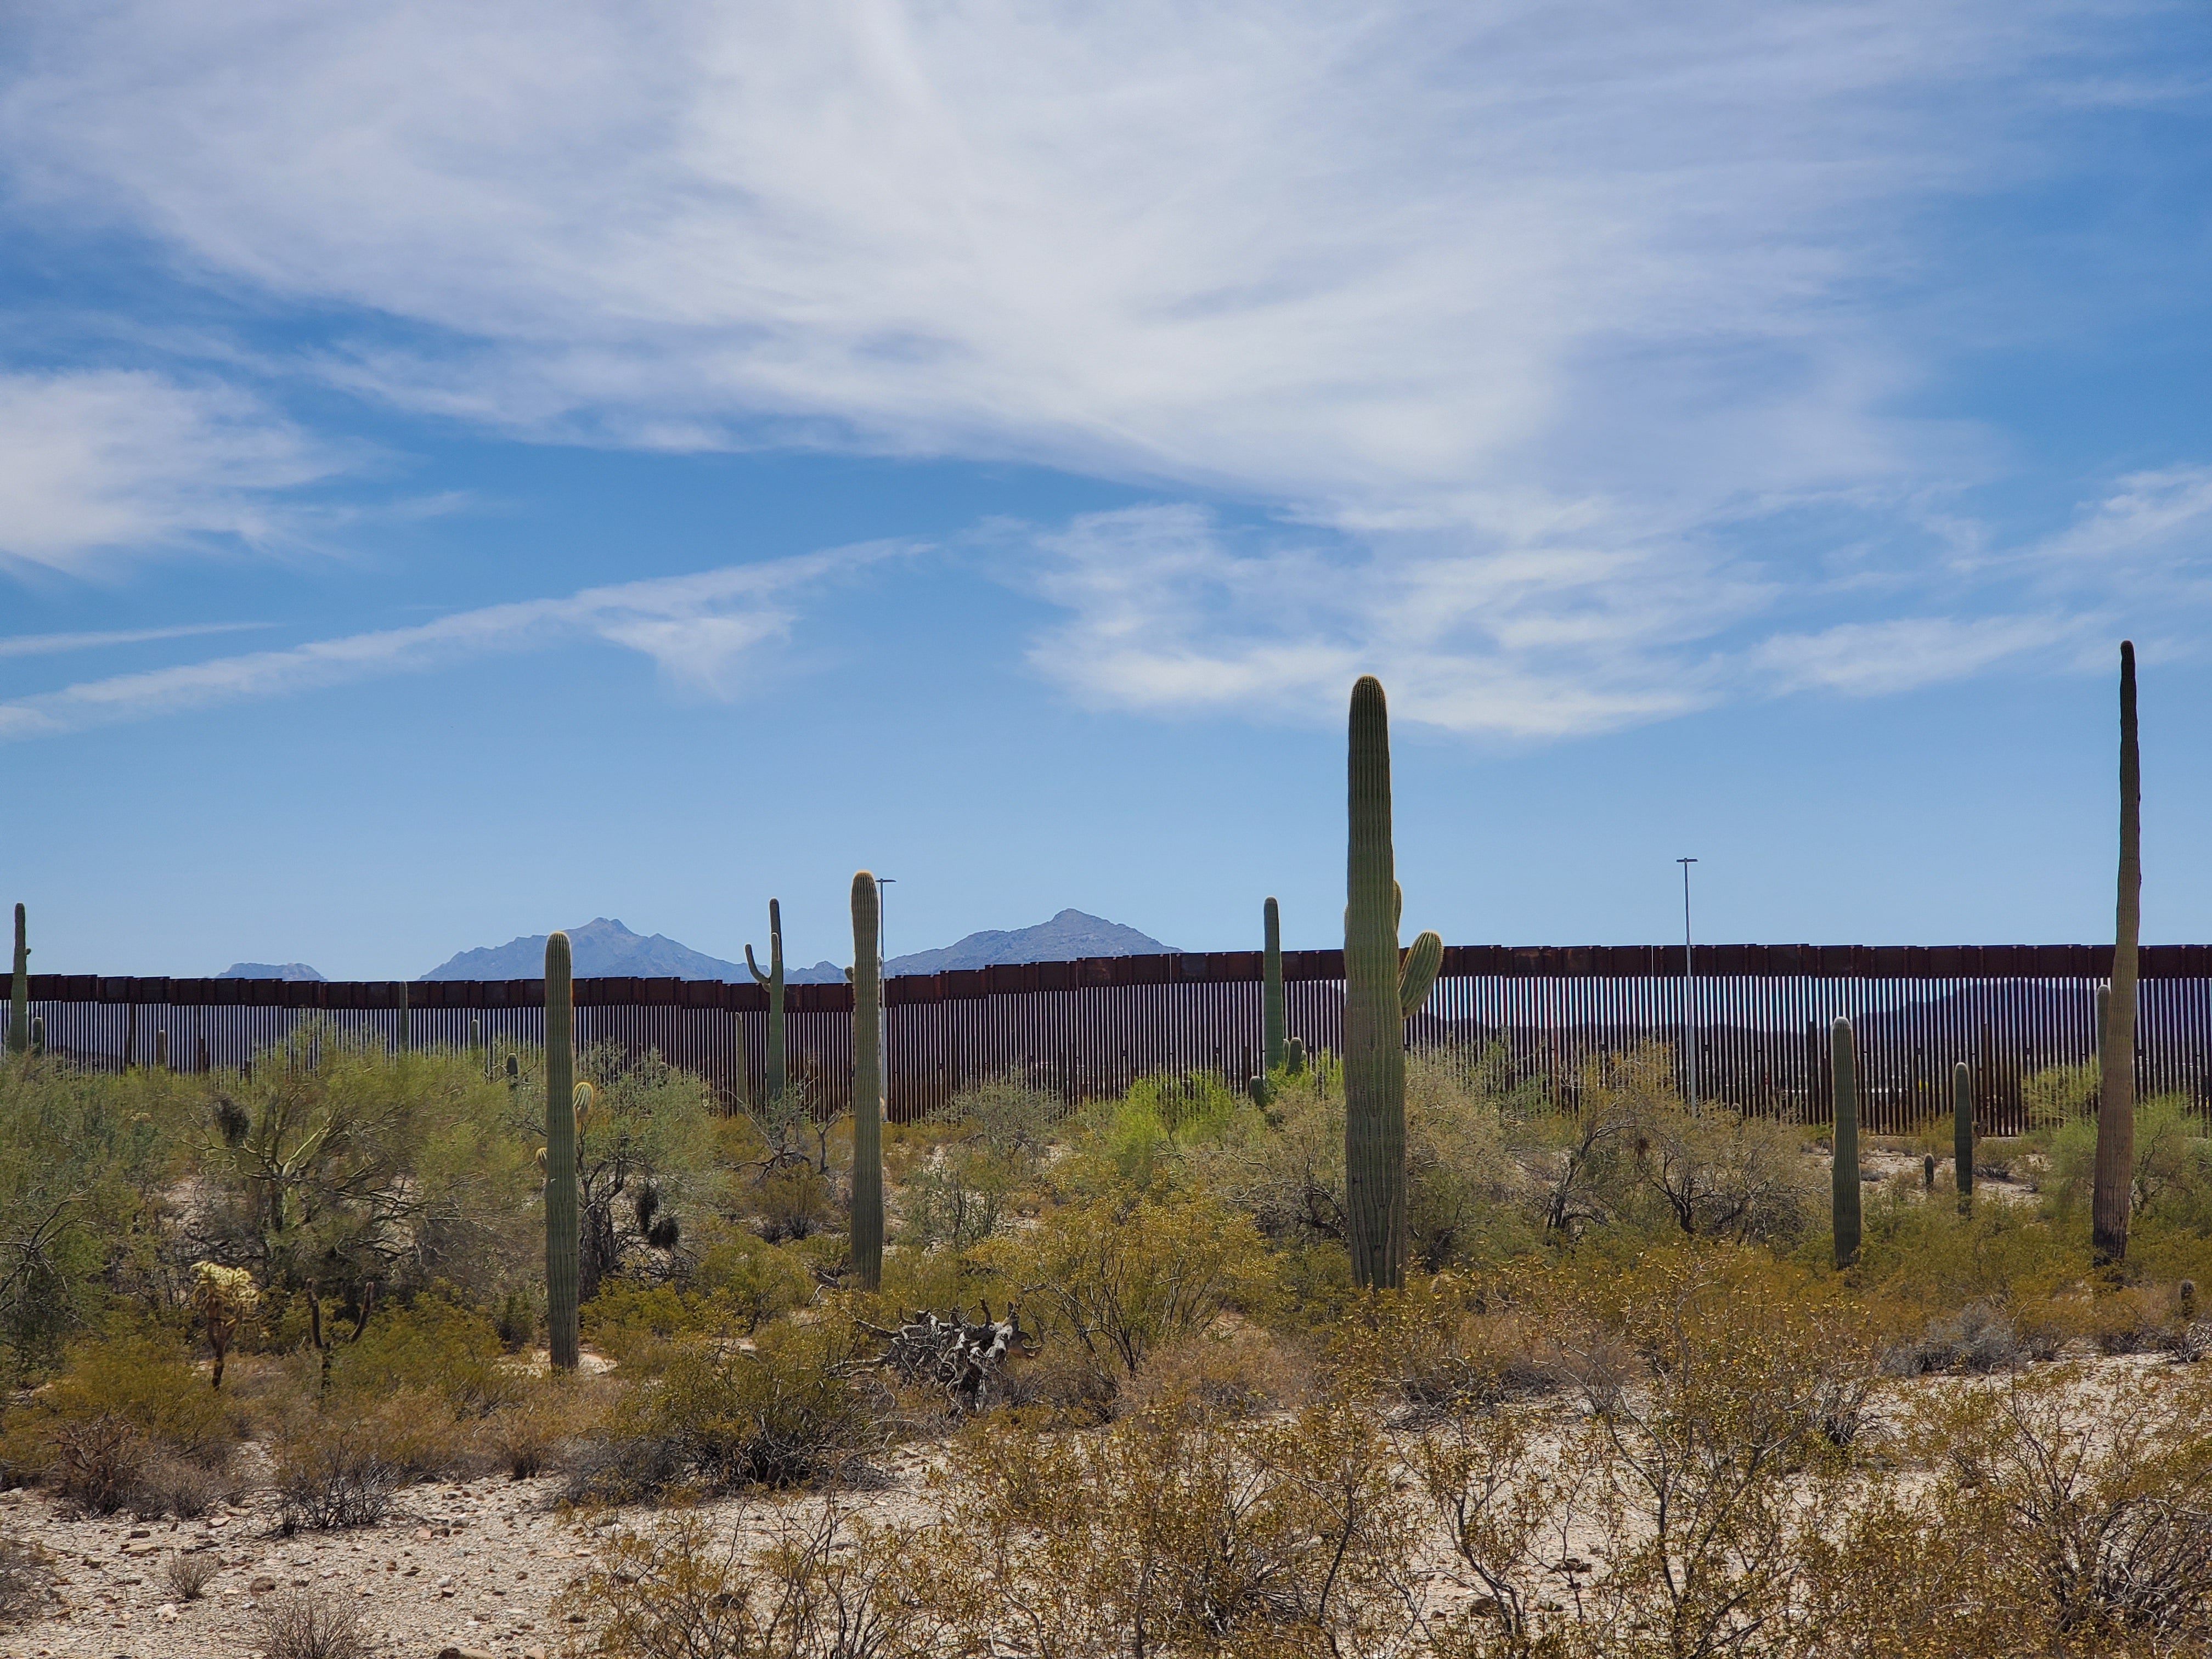 Mountains in Mexico in the distance beyond the U.S.-Mexico border wall, with the Arizona Sonoran Desert in the foreground